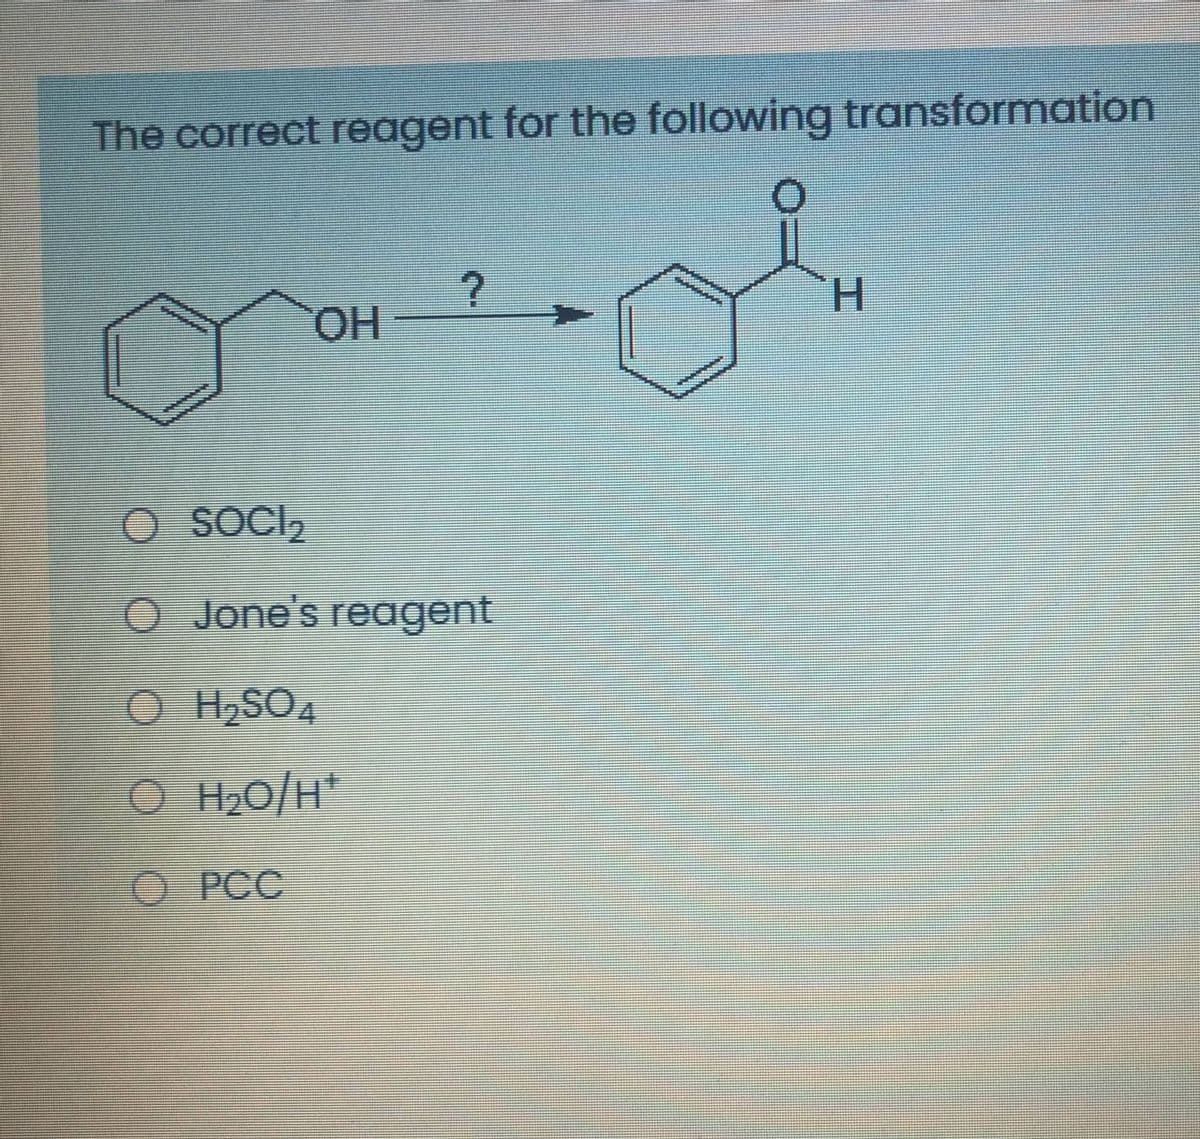 The correct reagent for the following transformation
H.
OSOCI,
O Jone's reagent
O H,SO4
O H20/H*
O PCC
